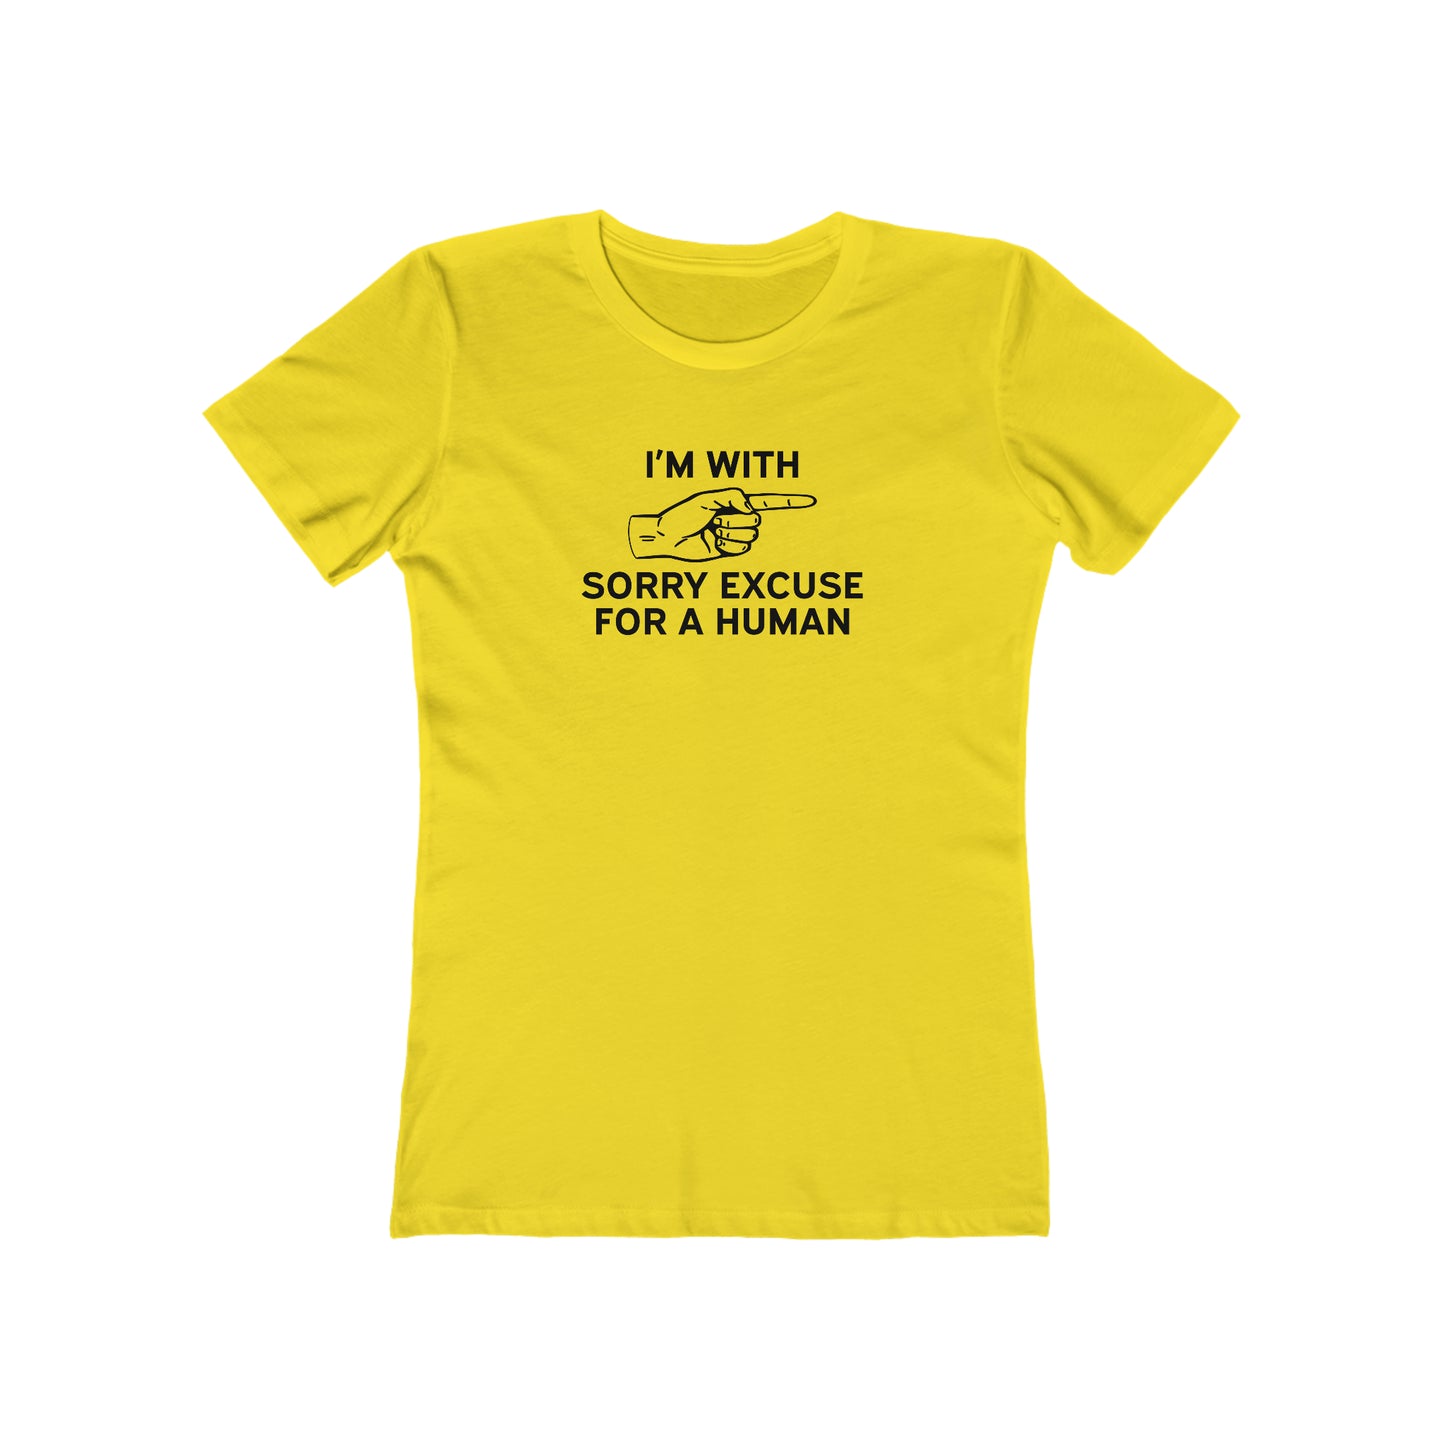 I'm With Sorry Excuse for a Human - Women's T-Shirt